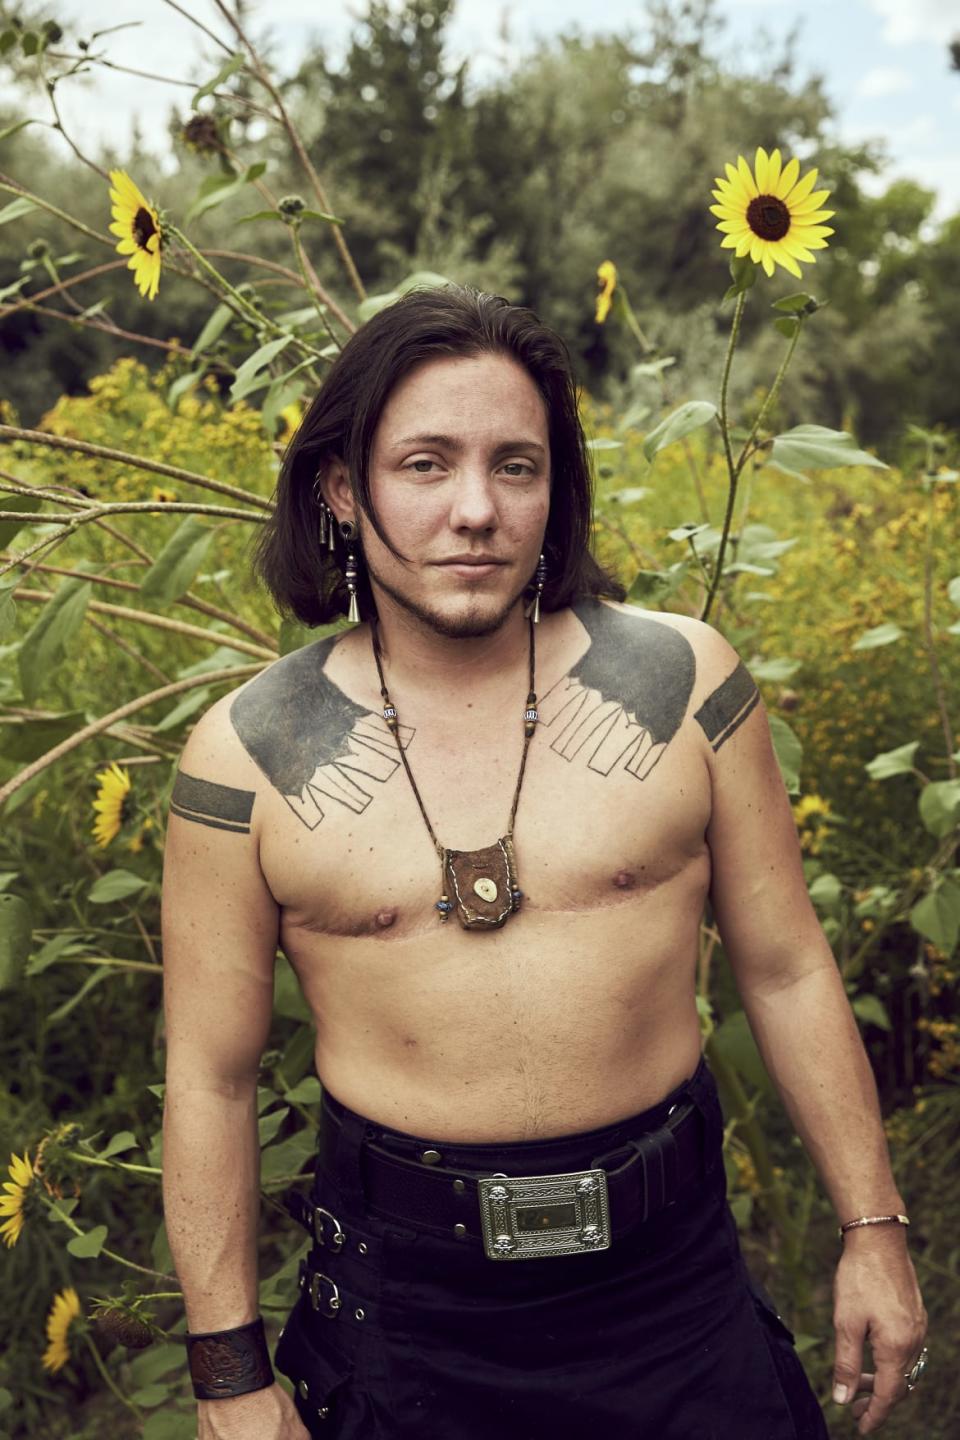 <div class="inline-image__caption"><p>Aodhàn identifies as a trans man and also as “Two Spirit” within the Native American culture and comes from the Cherokee. He taught me that before colonization there was no labels for gender non-conforming indigenous people. </p><p>The term “Two Spirit” is an umbrella term for all the different words (120+ documented words), each tribe came up with when colonists asked, “What are they?”. Aodhàn believes that within Cherokee tribe “Two Spirit” means “It’s not about me” and his role is to help the people.</p><p>Often a two spirit person would take a vital role within the community because they where allowed to blend both the masculine and feminine roles in life, ceremony and art that are usually separate. He put it so beautifully. “Women are the moon and men are the sun, so the moon is feminine and the sun is masculine. The two spirit people are the sunrise and the sunset that brings these two together”. I love that.</p></div> <div class="inline-image__credit">Soraya Zaman</div>